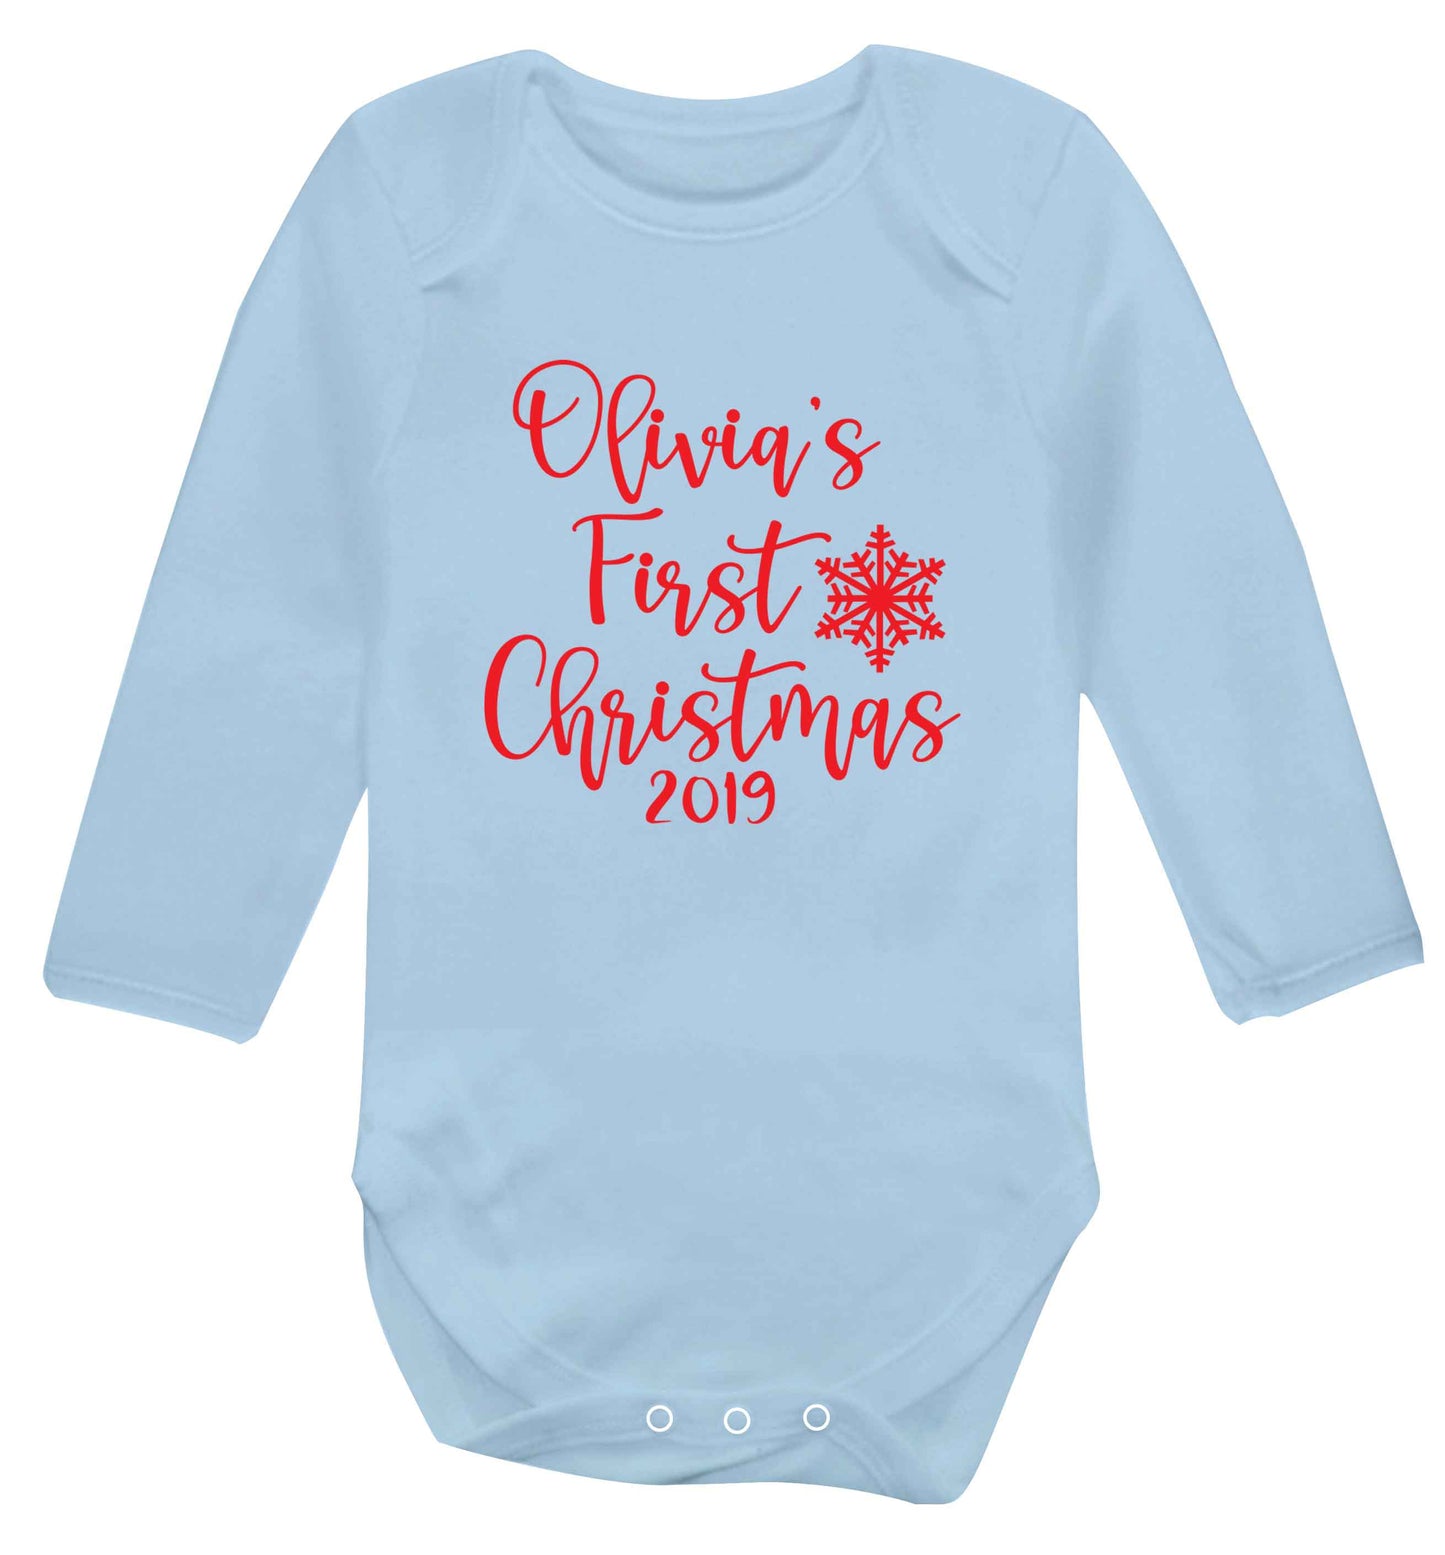 Personalised first Christmas - script text baby vest long sleeved pale blue 6-12 months